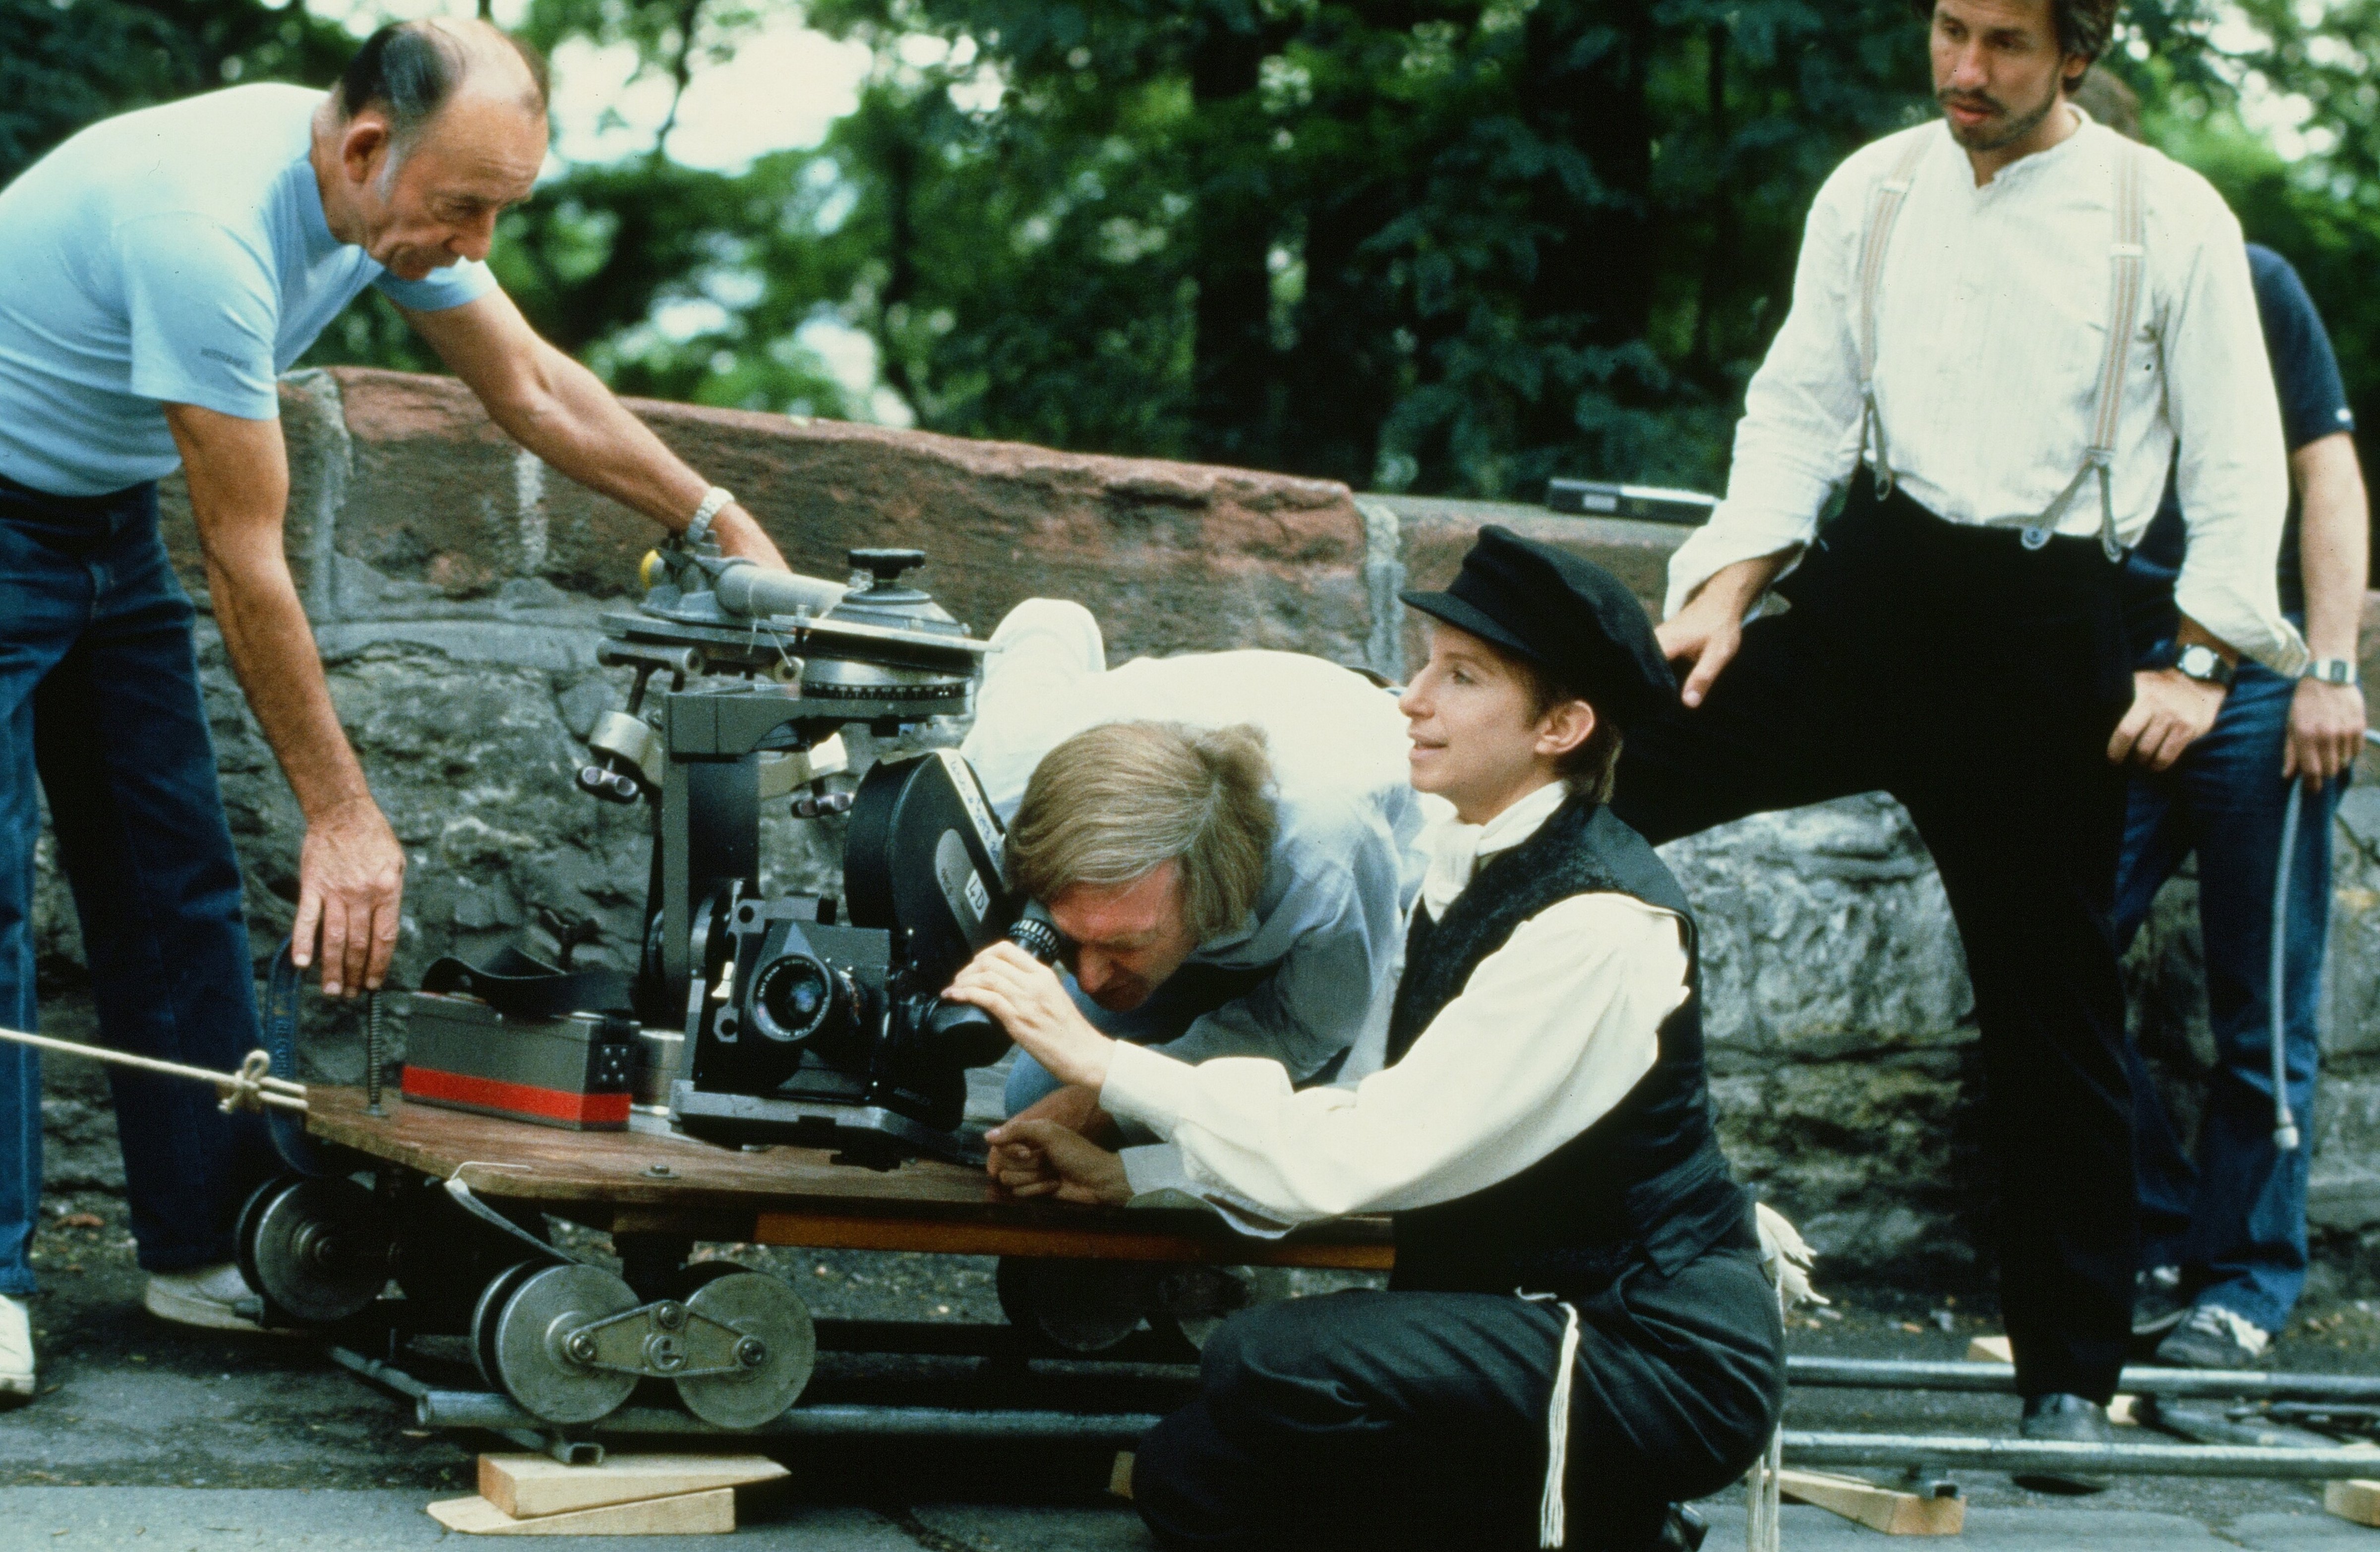 Barbra Streisand behind the scenes directing "Yentl," circa 1983. (Hulton Archive/Getty Images)